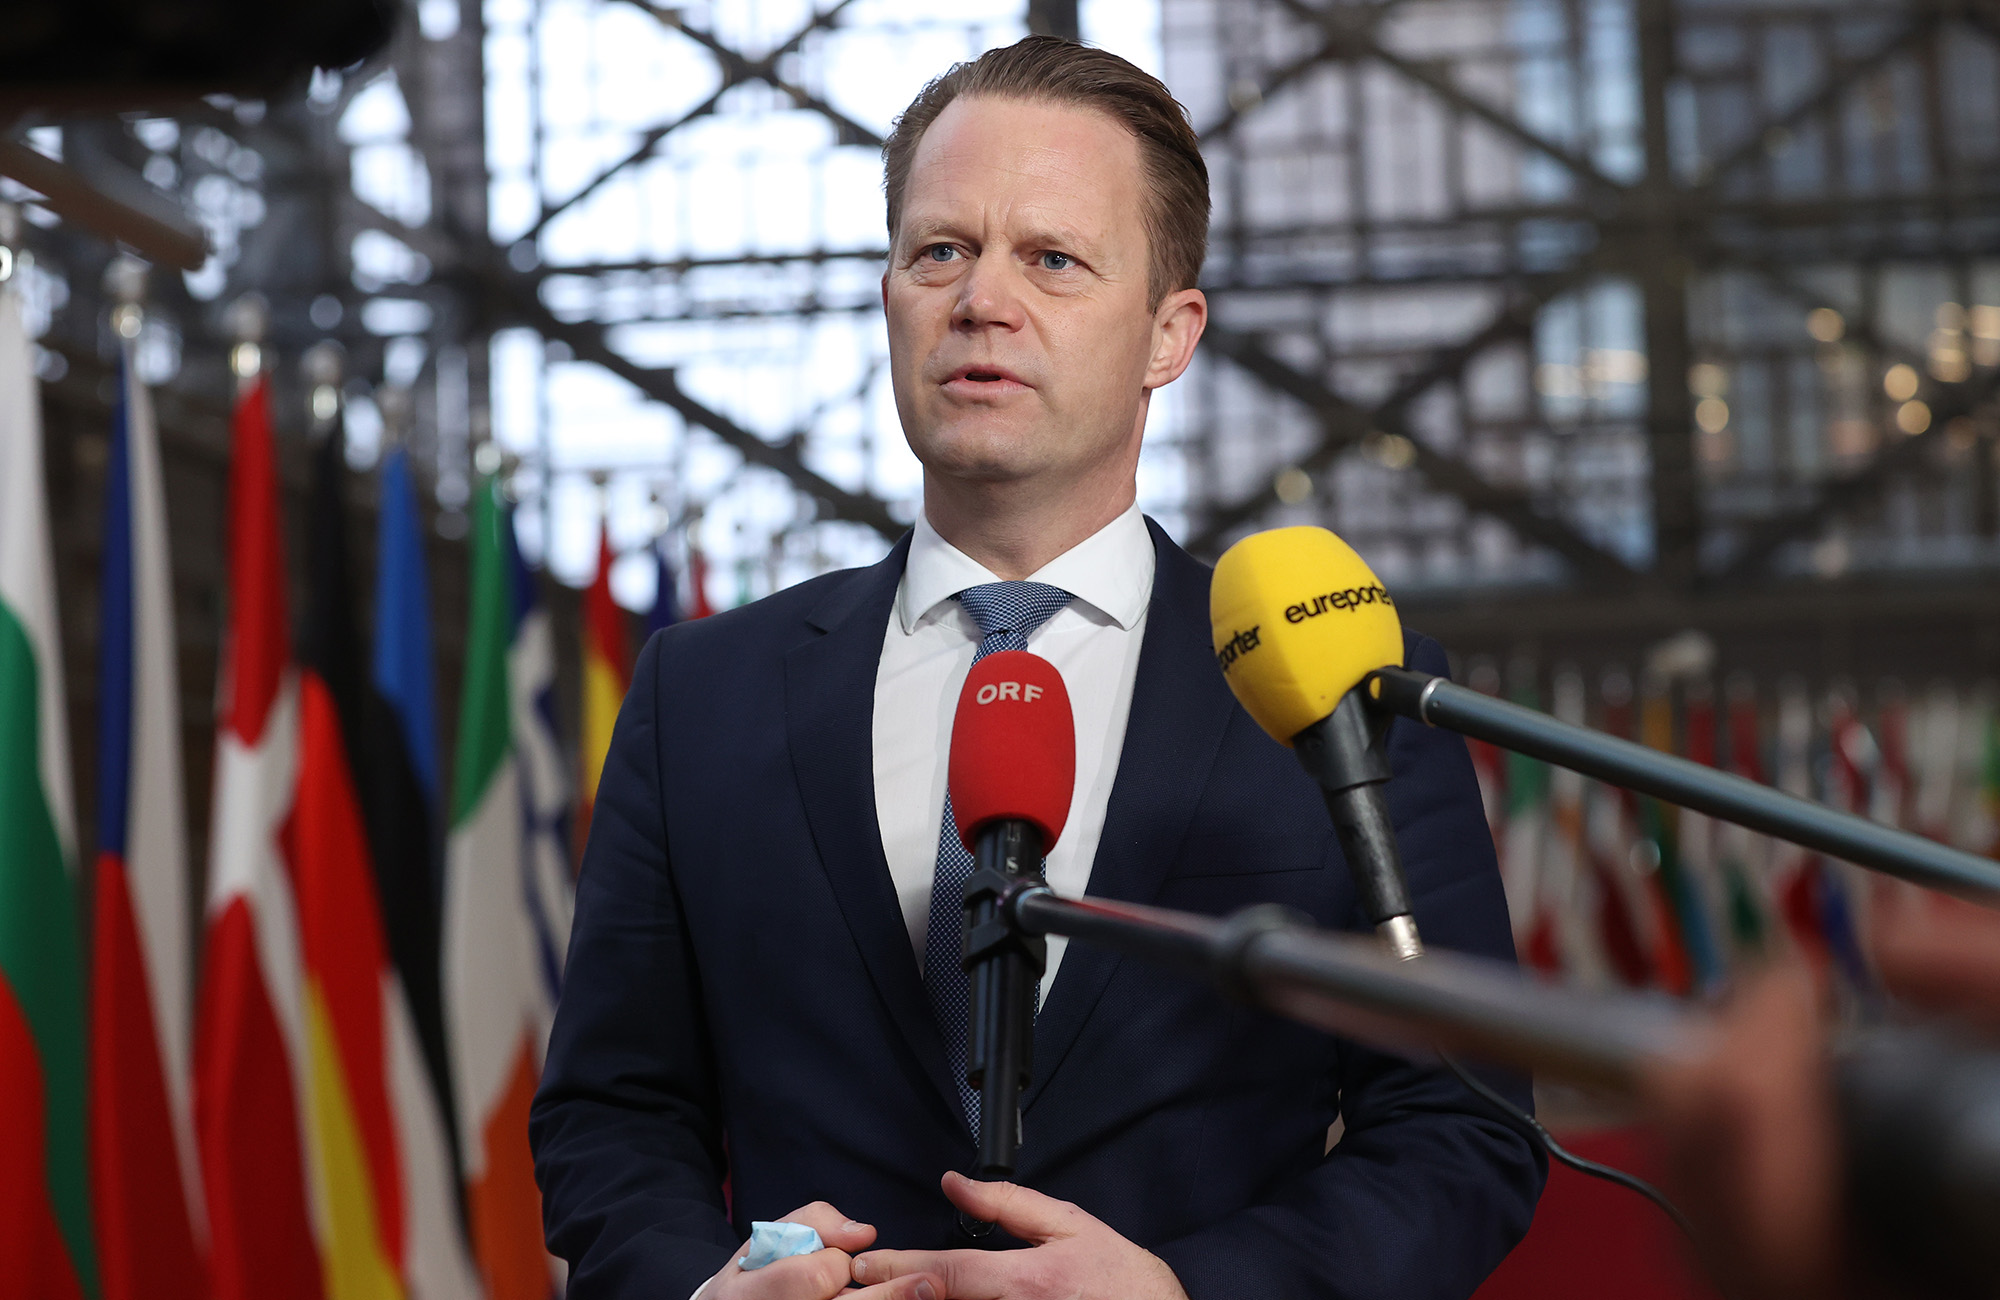 Denmark's Foreign Minister Jeppe Kofod speaks to press members ahead of EU General Affairs Council meeting in Brussels, Belgium, on January 25.